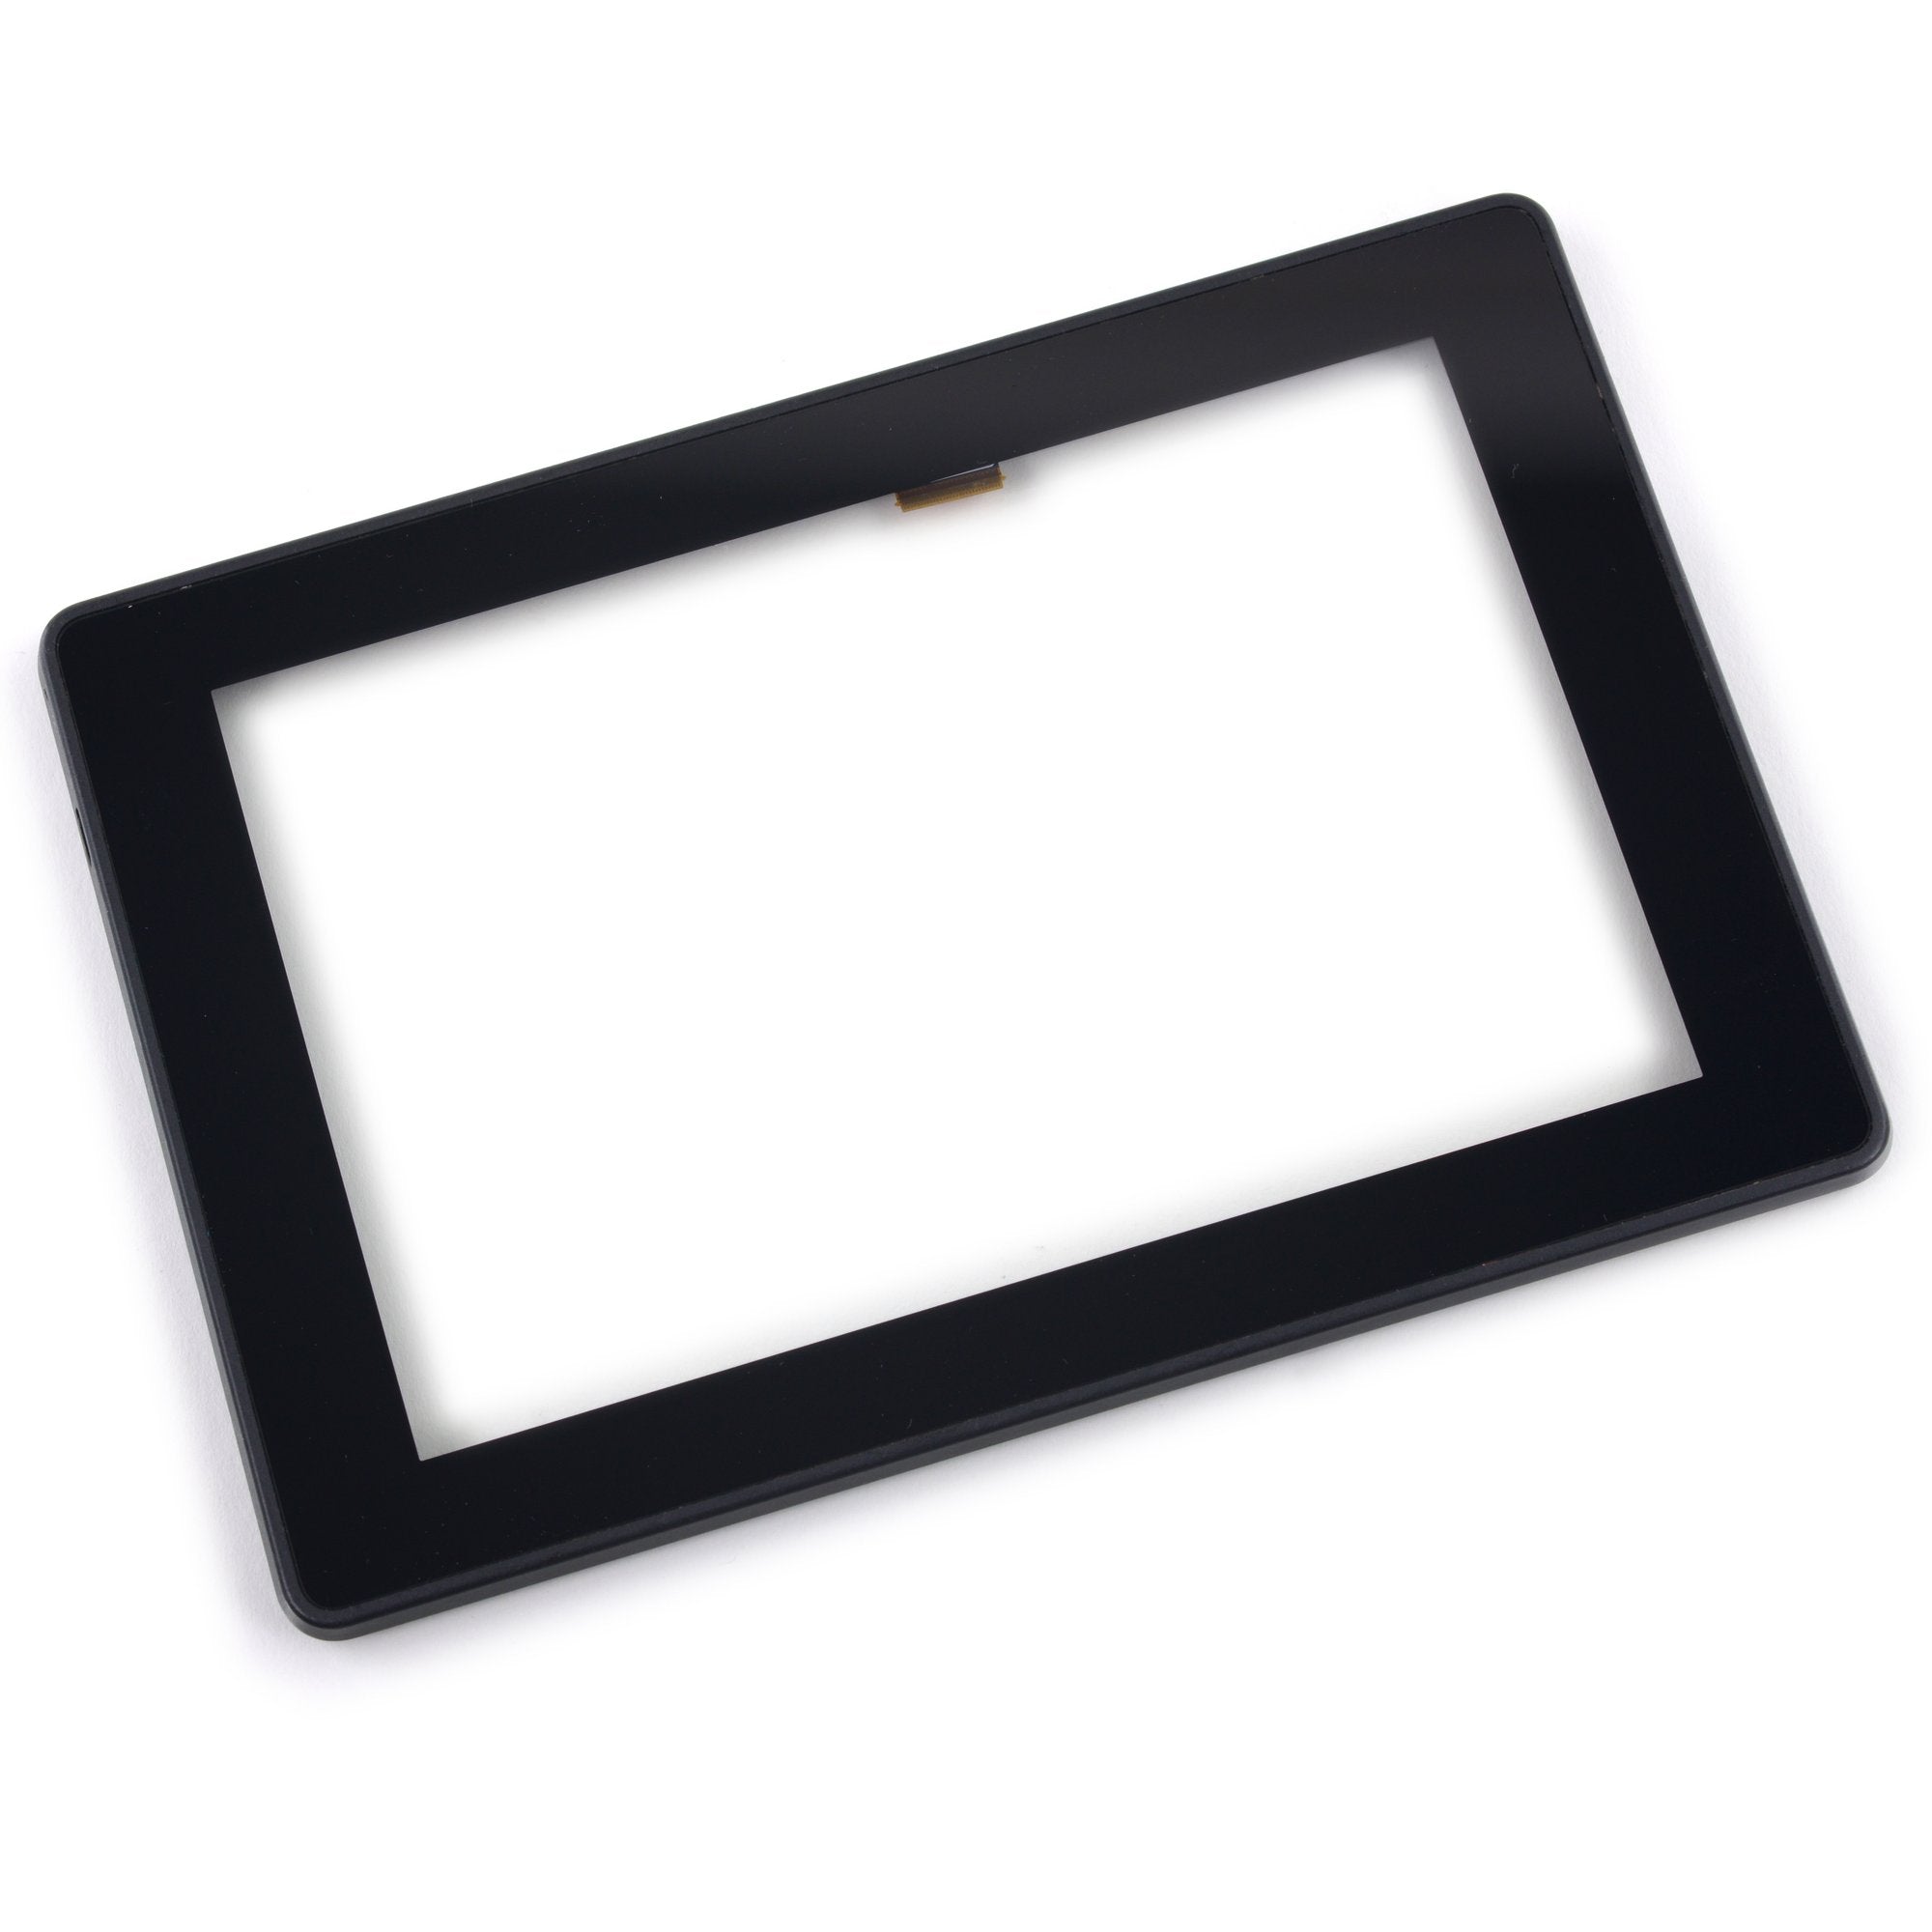 Kindle Fire HD 7" (2013, 2nd Gen) Front Panel Assembly (Digitizer)